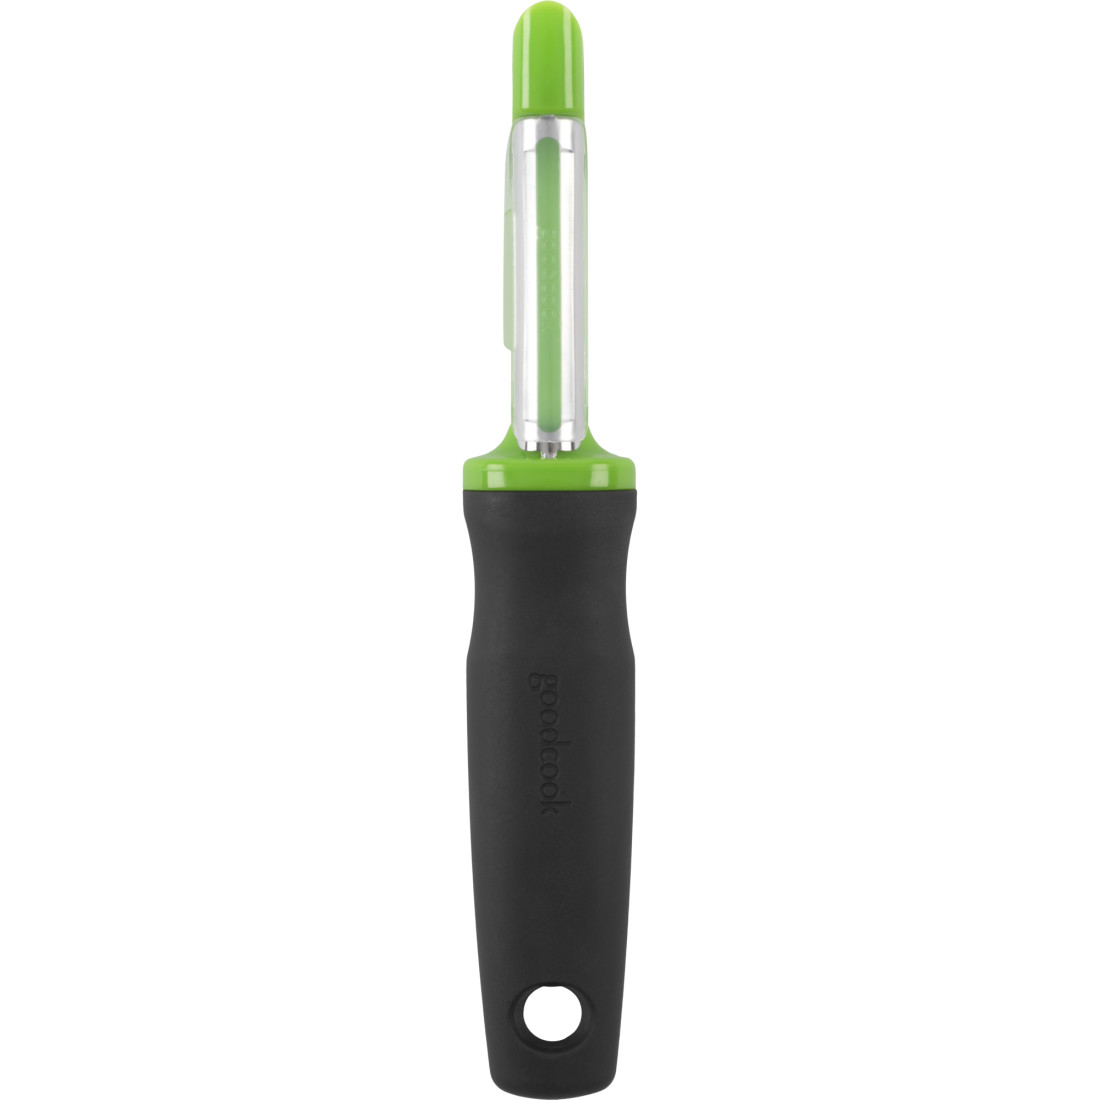 Great Choice Products GCP-HM-78988 2Pcs Swivel Peeler, Vegetable